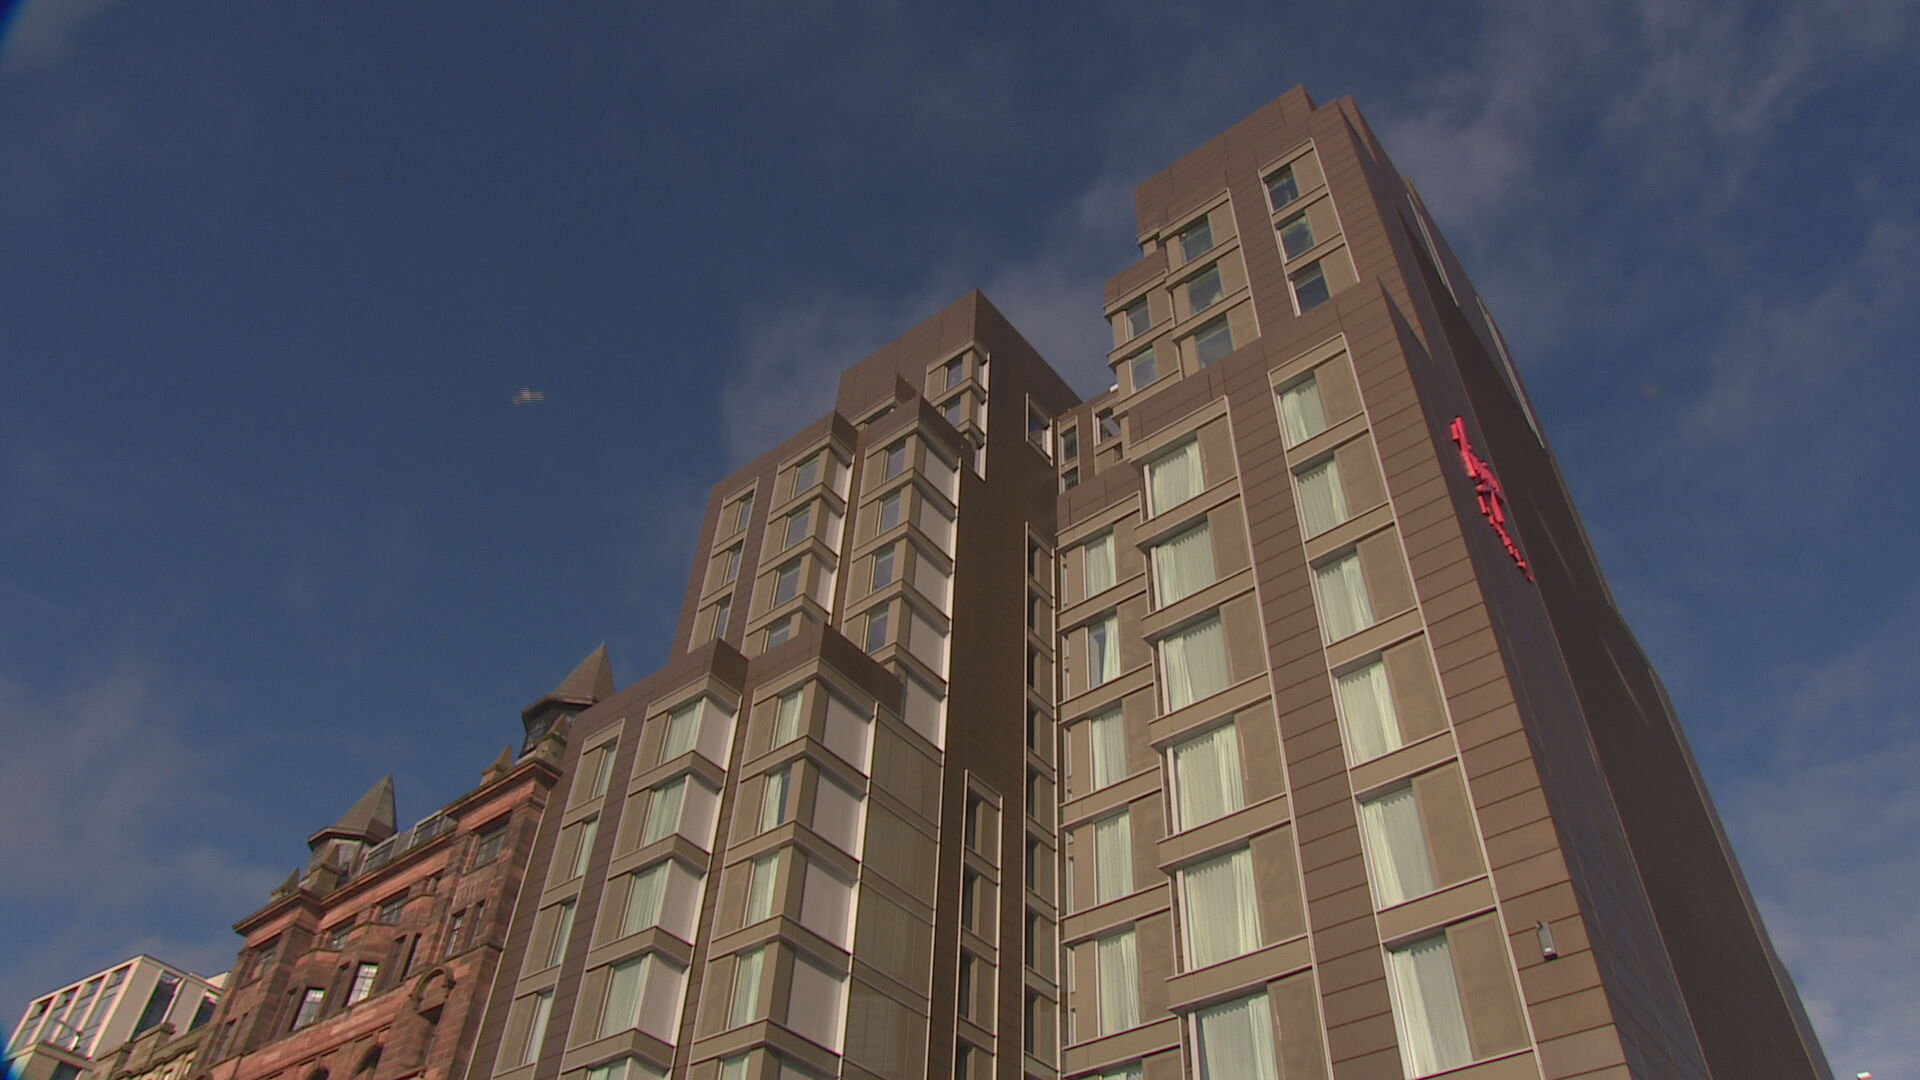 The Virgin Group approached Lloyds Developments Limited to purchase the hotel before it went under. Photo: STV News.